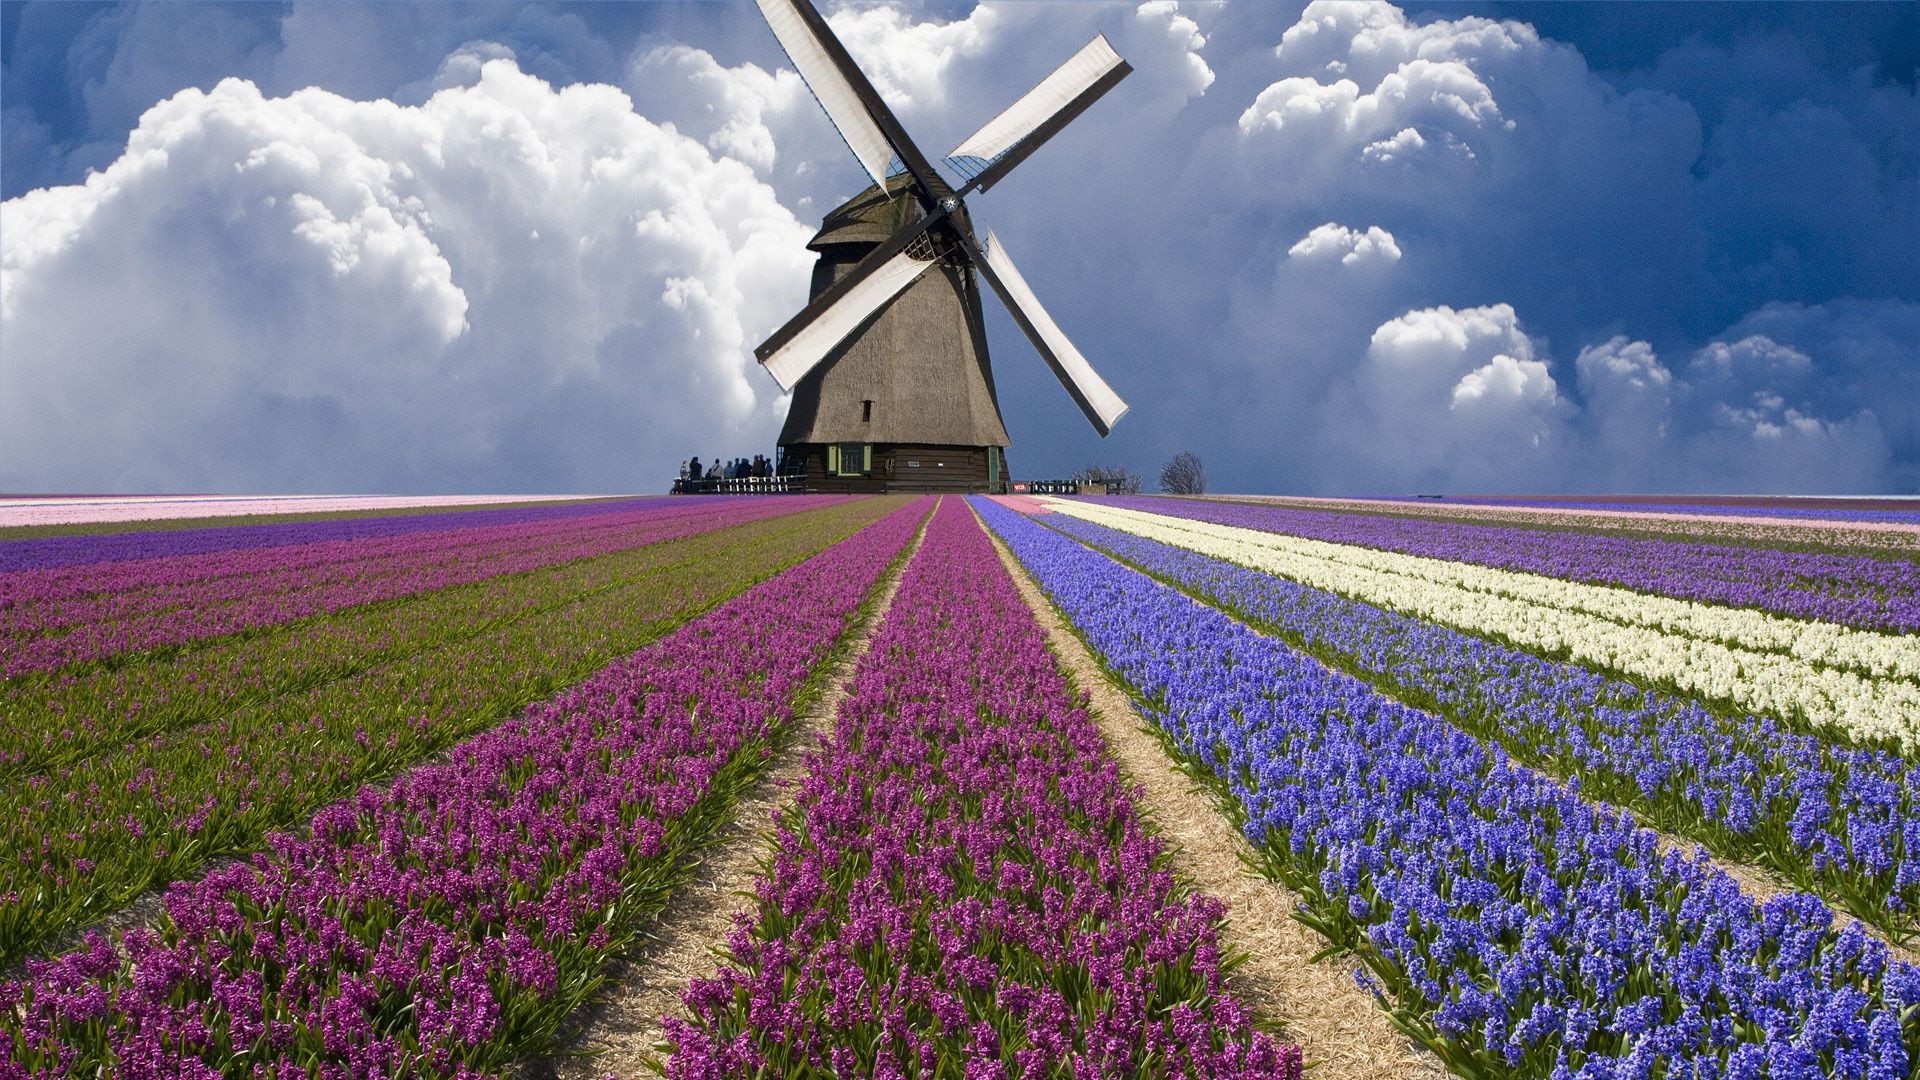 field of flowers windmill landscape agriculture outdoors farm nature sky countryside rural energy summer environment field wind flower cropland